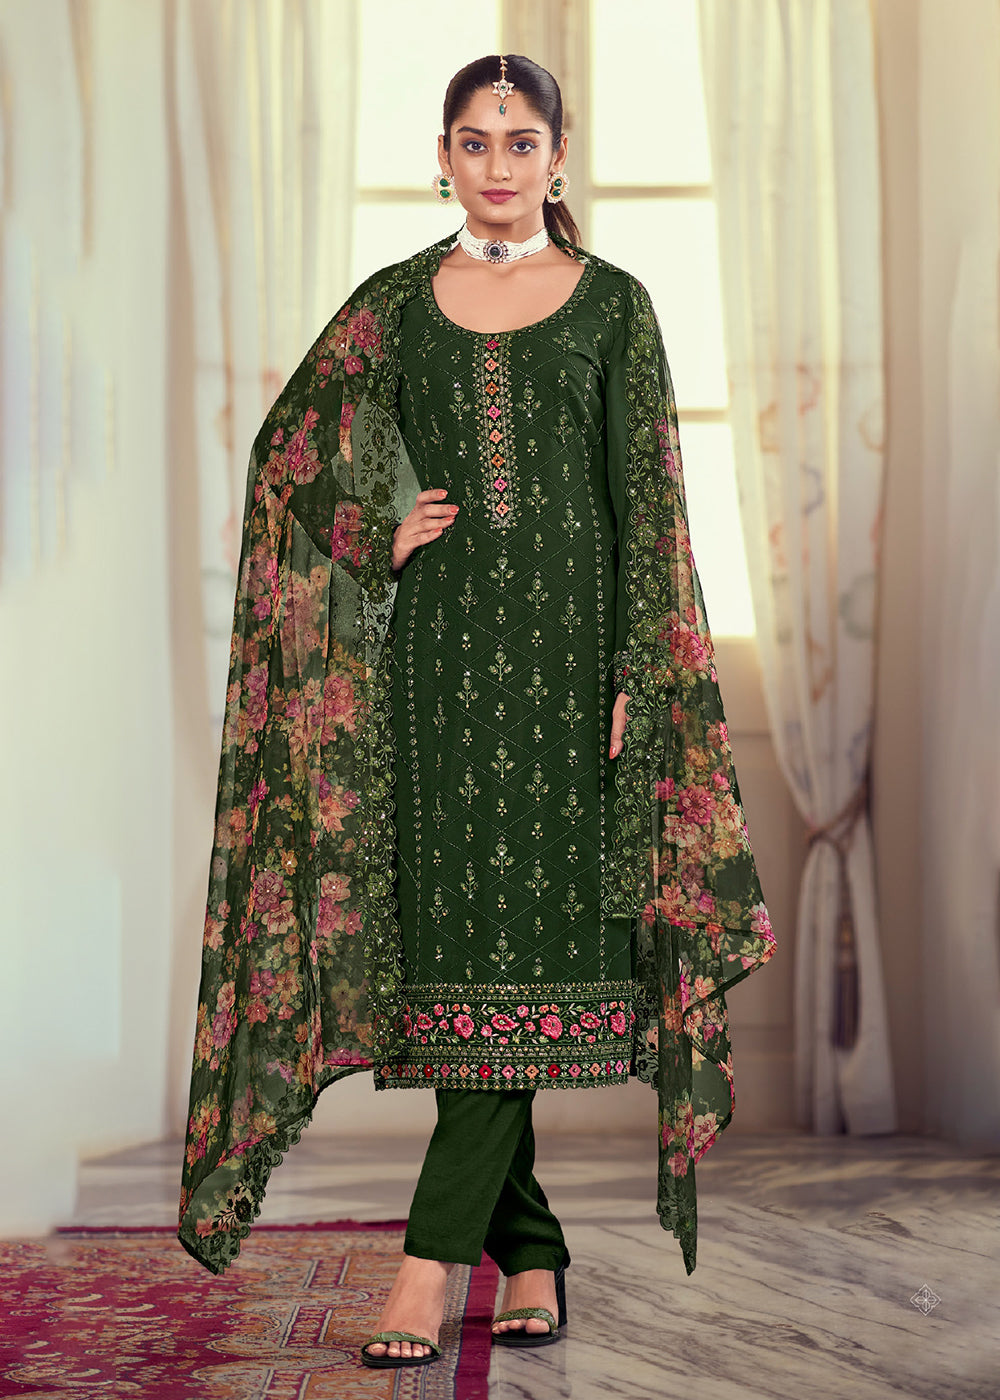 Buy Now Heavy Embroidered Classy Green Georgette Festive Salwar Suit Online in USA, UK, Canada, Germany, Australia & Worldwide at Empress Clothing.